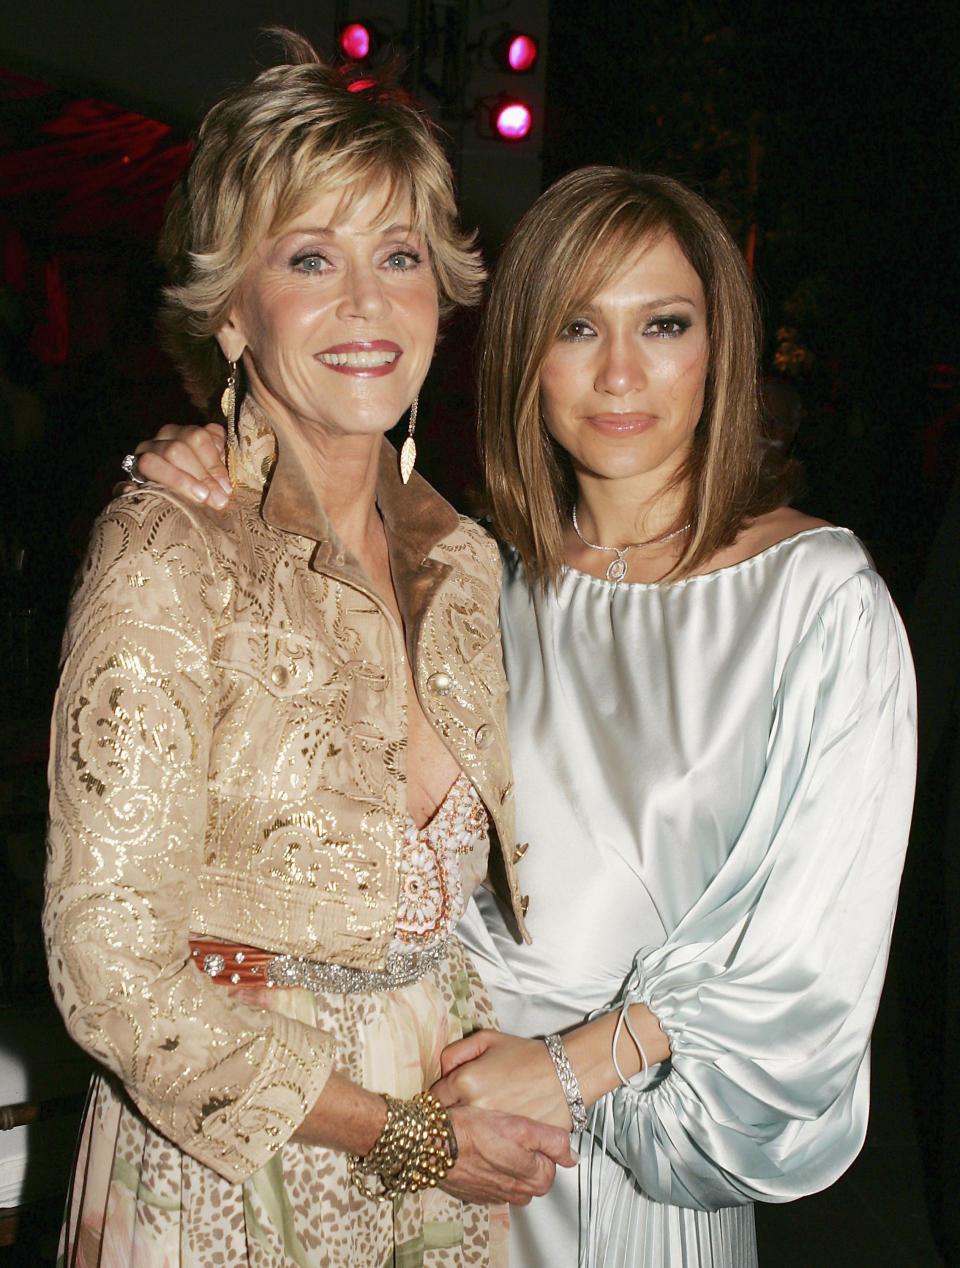 LOS ANGELES - APRIL 29:  Actors Jane Fonda (L) and Jennifer Lopez pose at the afterparty for the premiere of New Line Cinema's "Monster-In-Law" at the Armand Hammer Museum on April 29, 2005 in Los Angeles, California. (Photo by Kevin Winter/Getty Images)